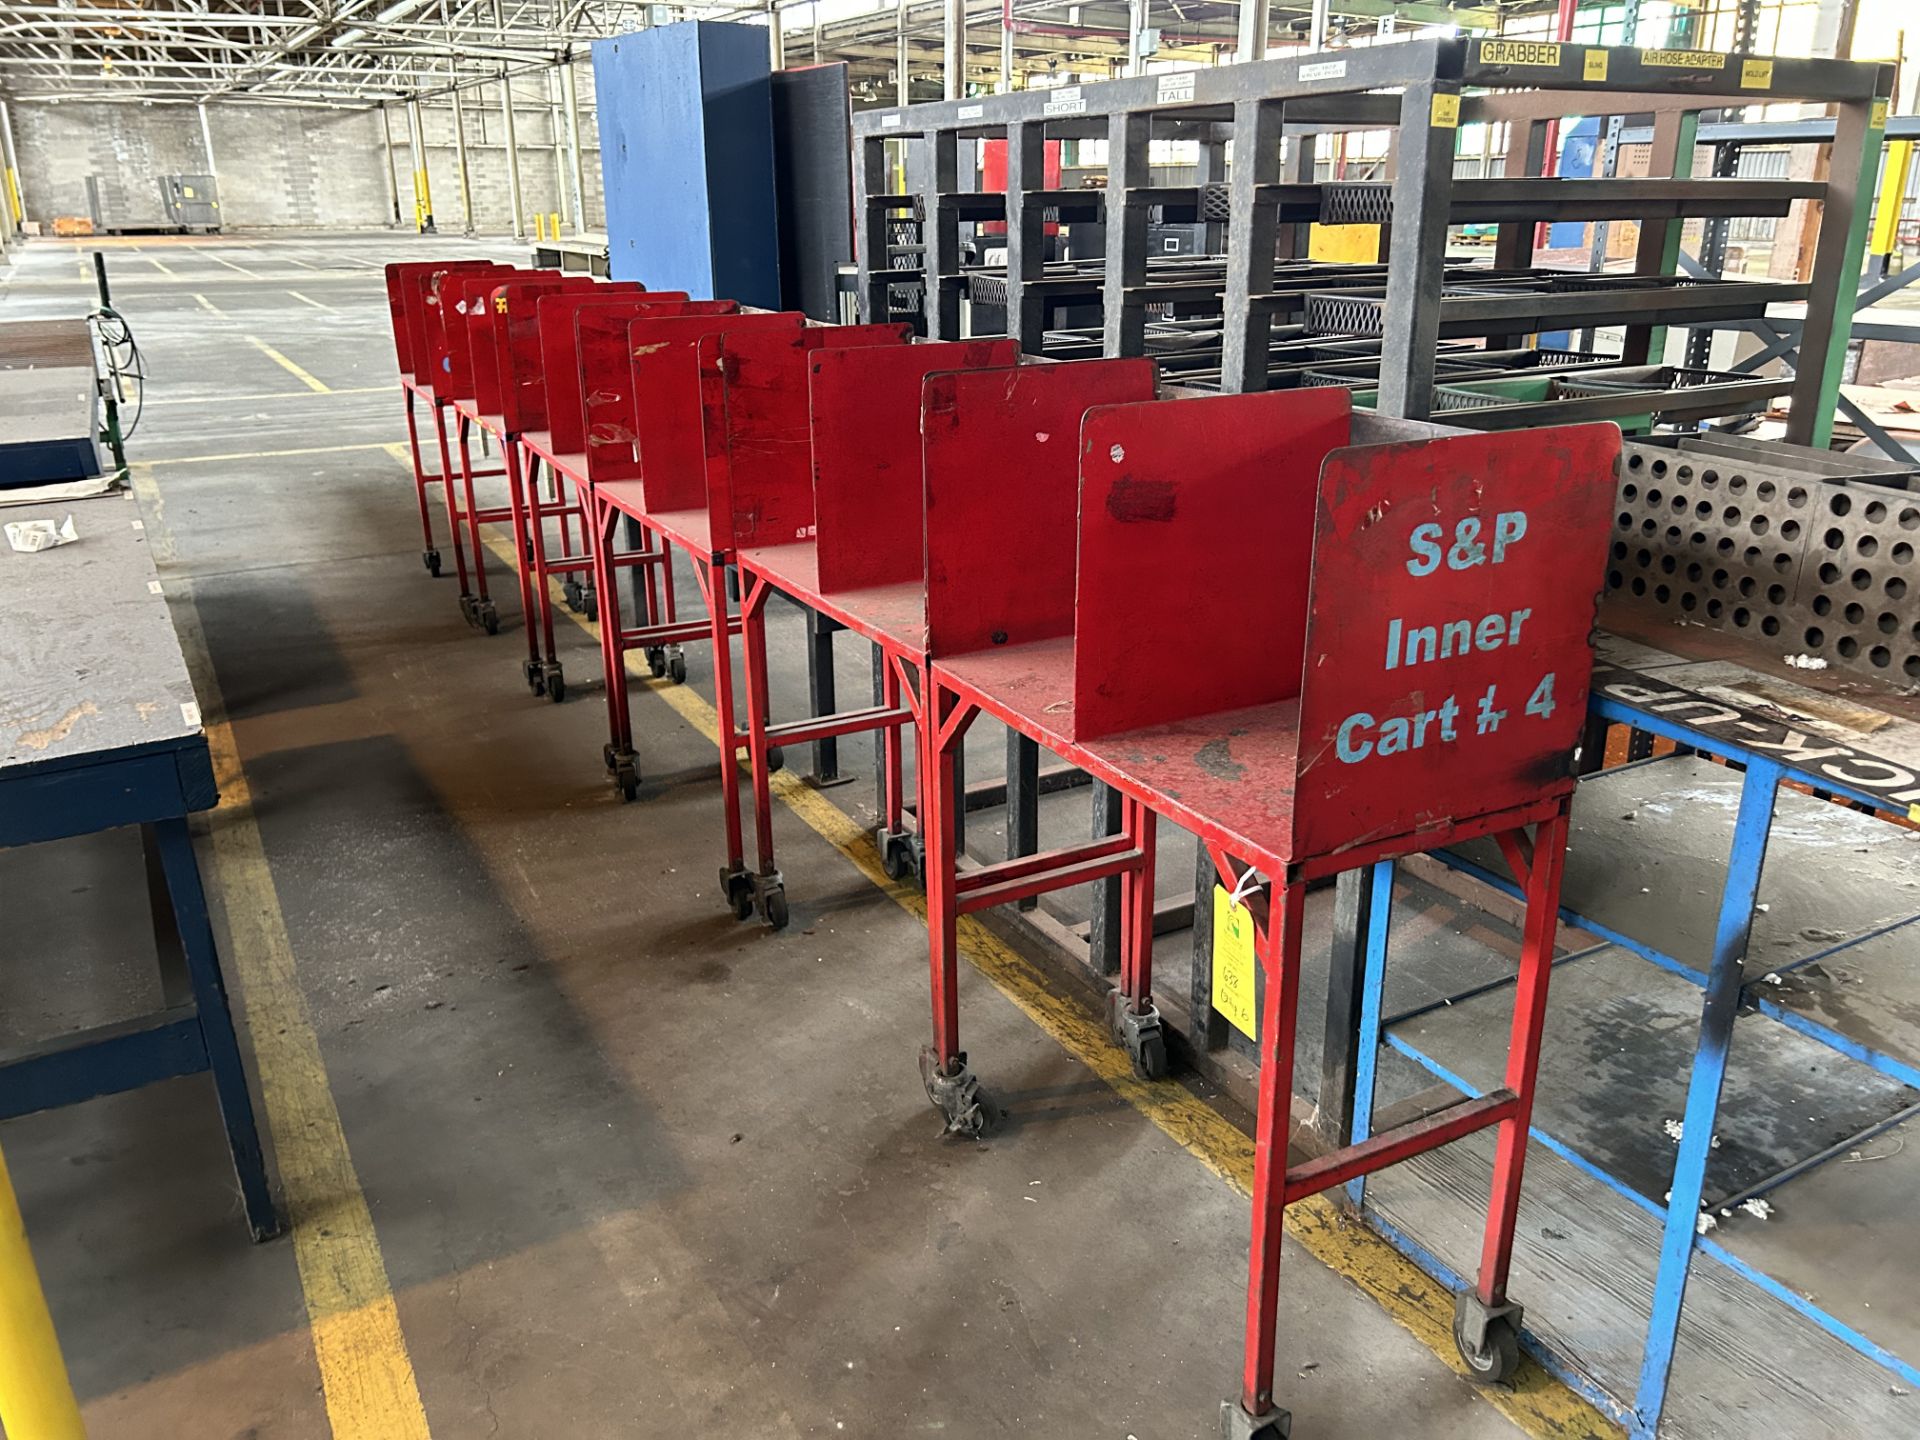 Qty. 6 Red Shop Carts, Rigging/ Removal Fee - $175